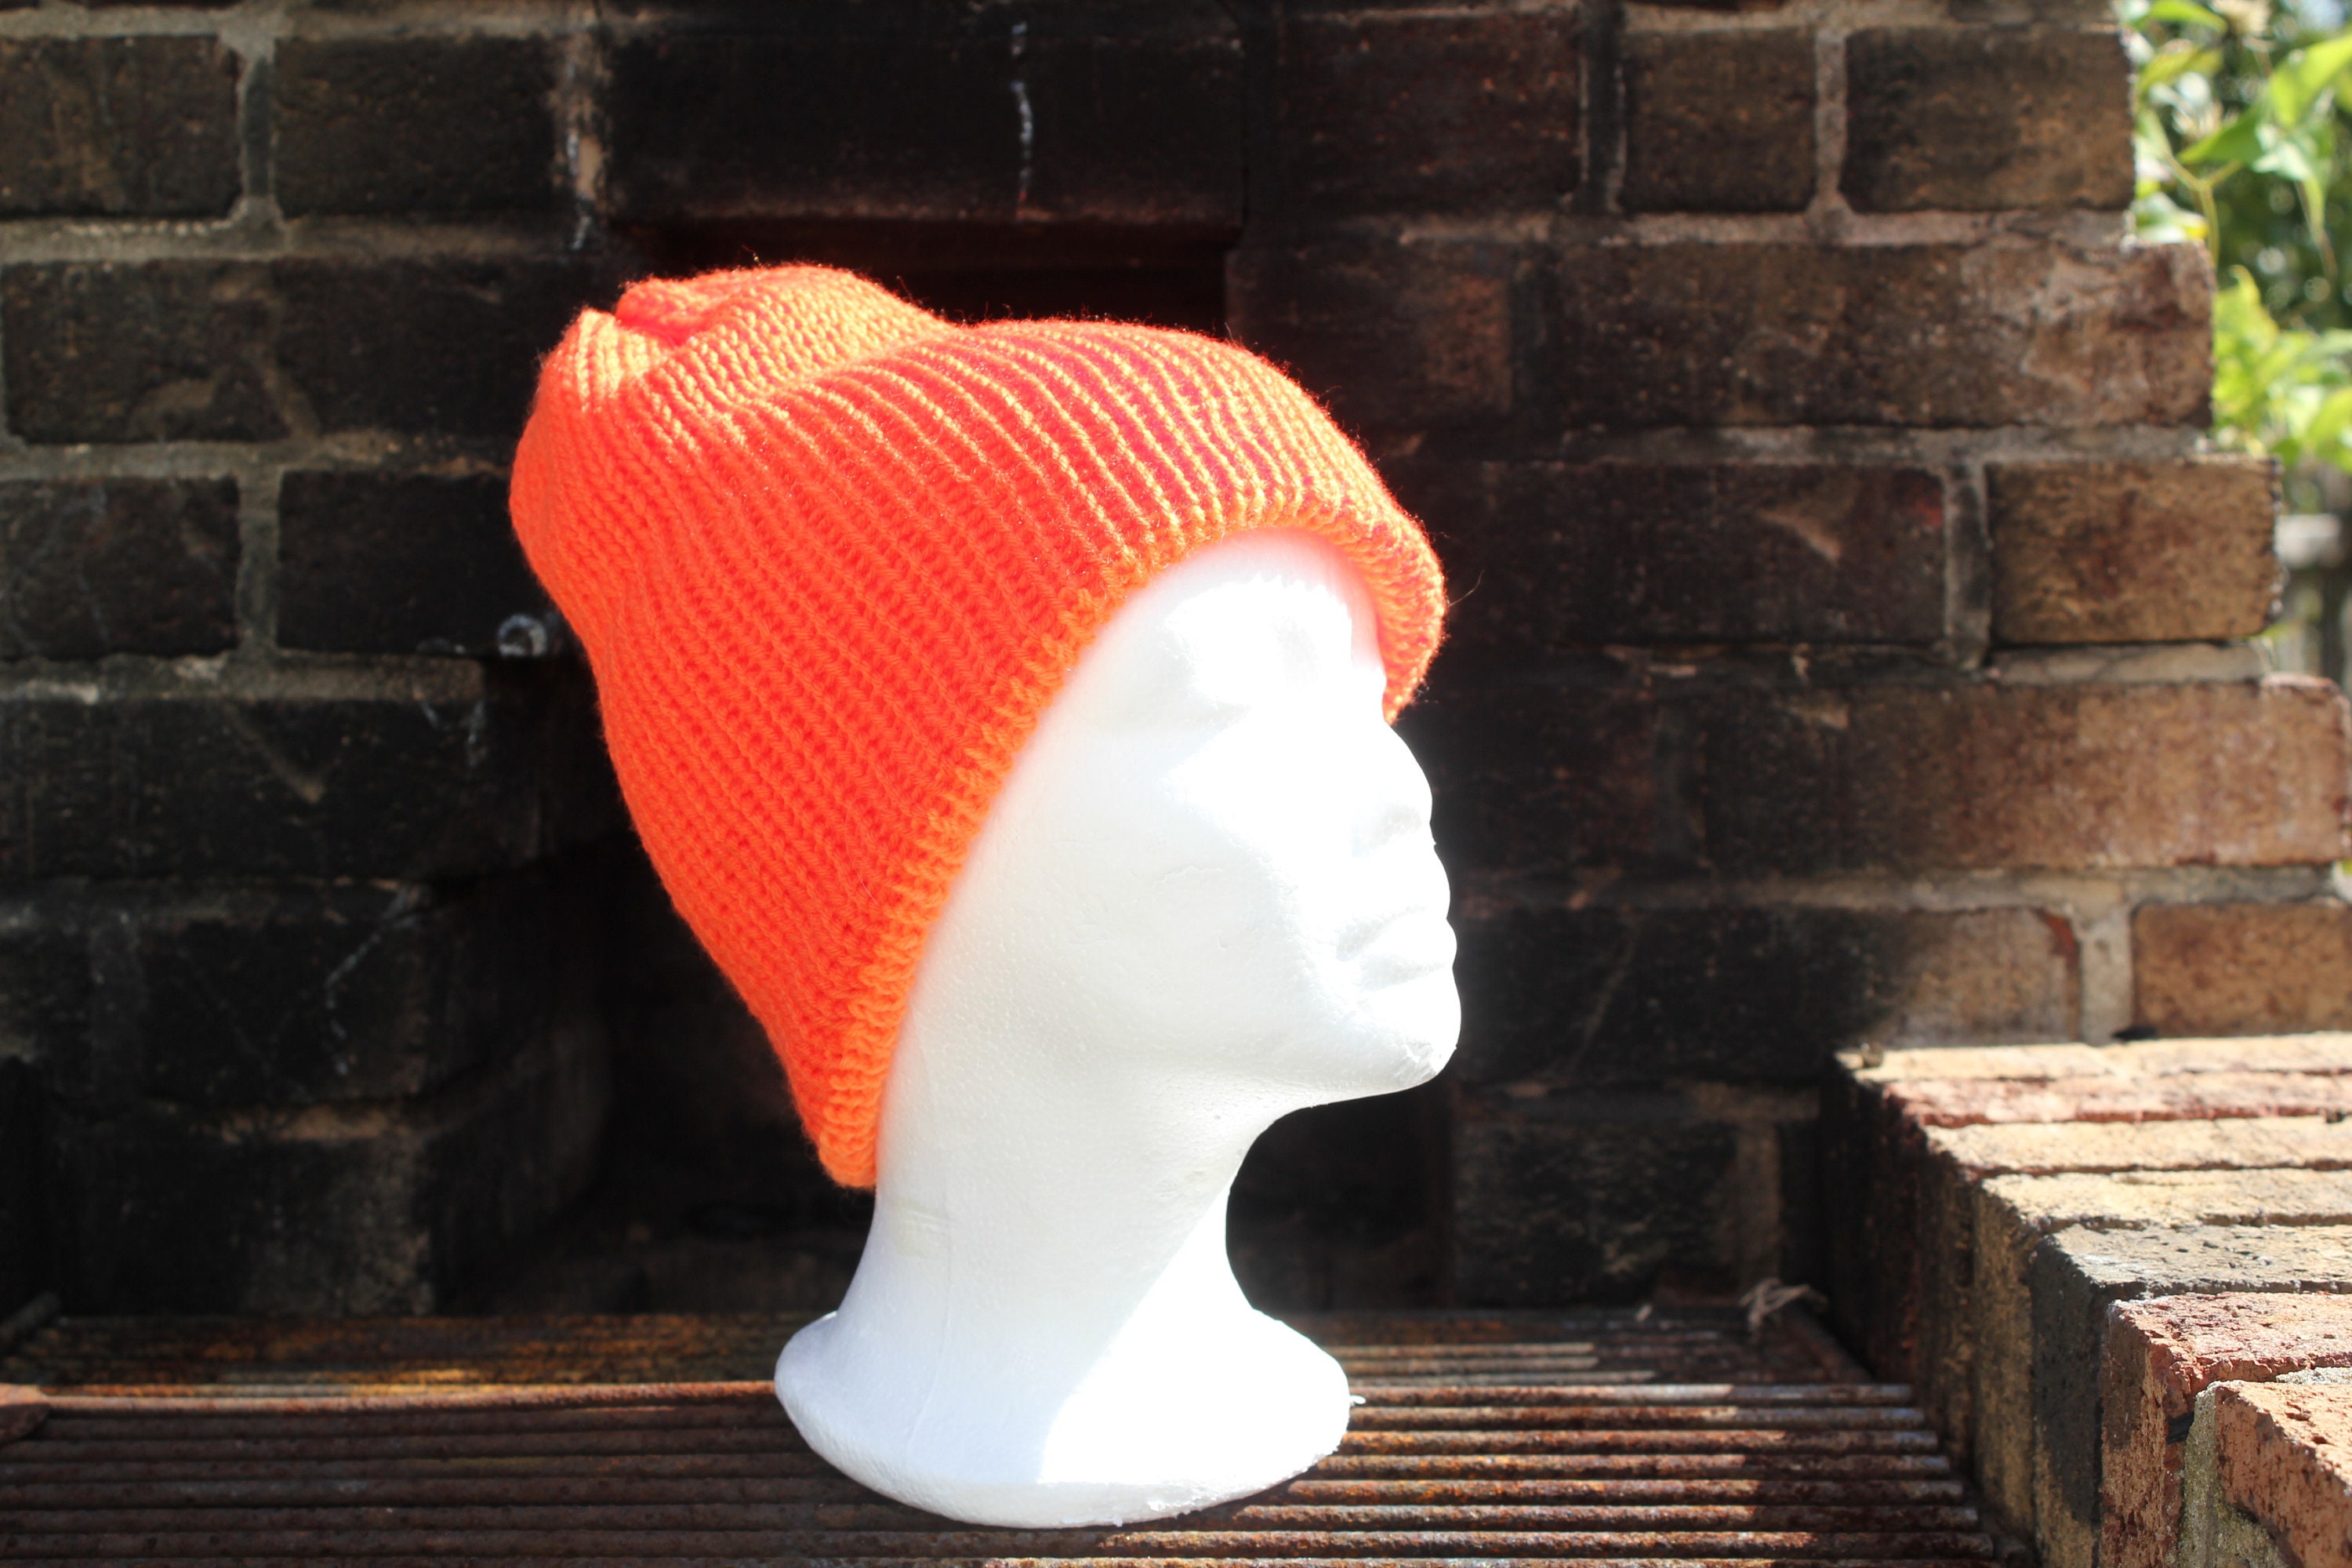 Double orange hat with a pom-pom; excellent for hunting and outdoors warm and dense almost neon orange protects against wind and water